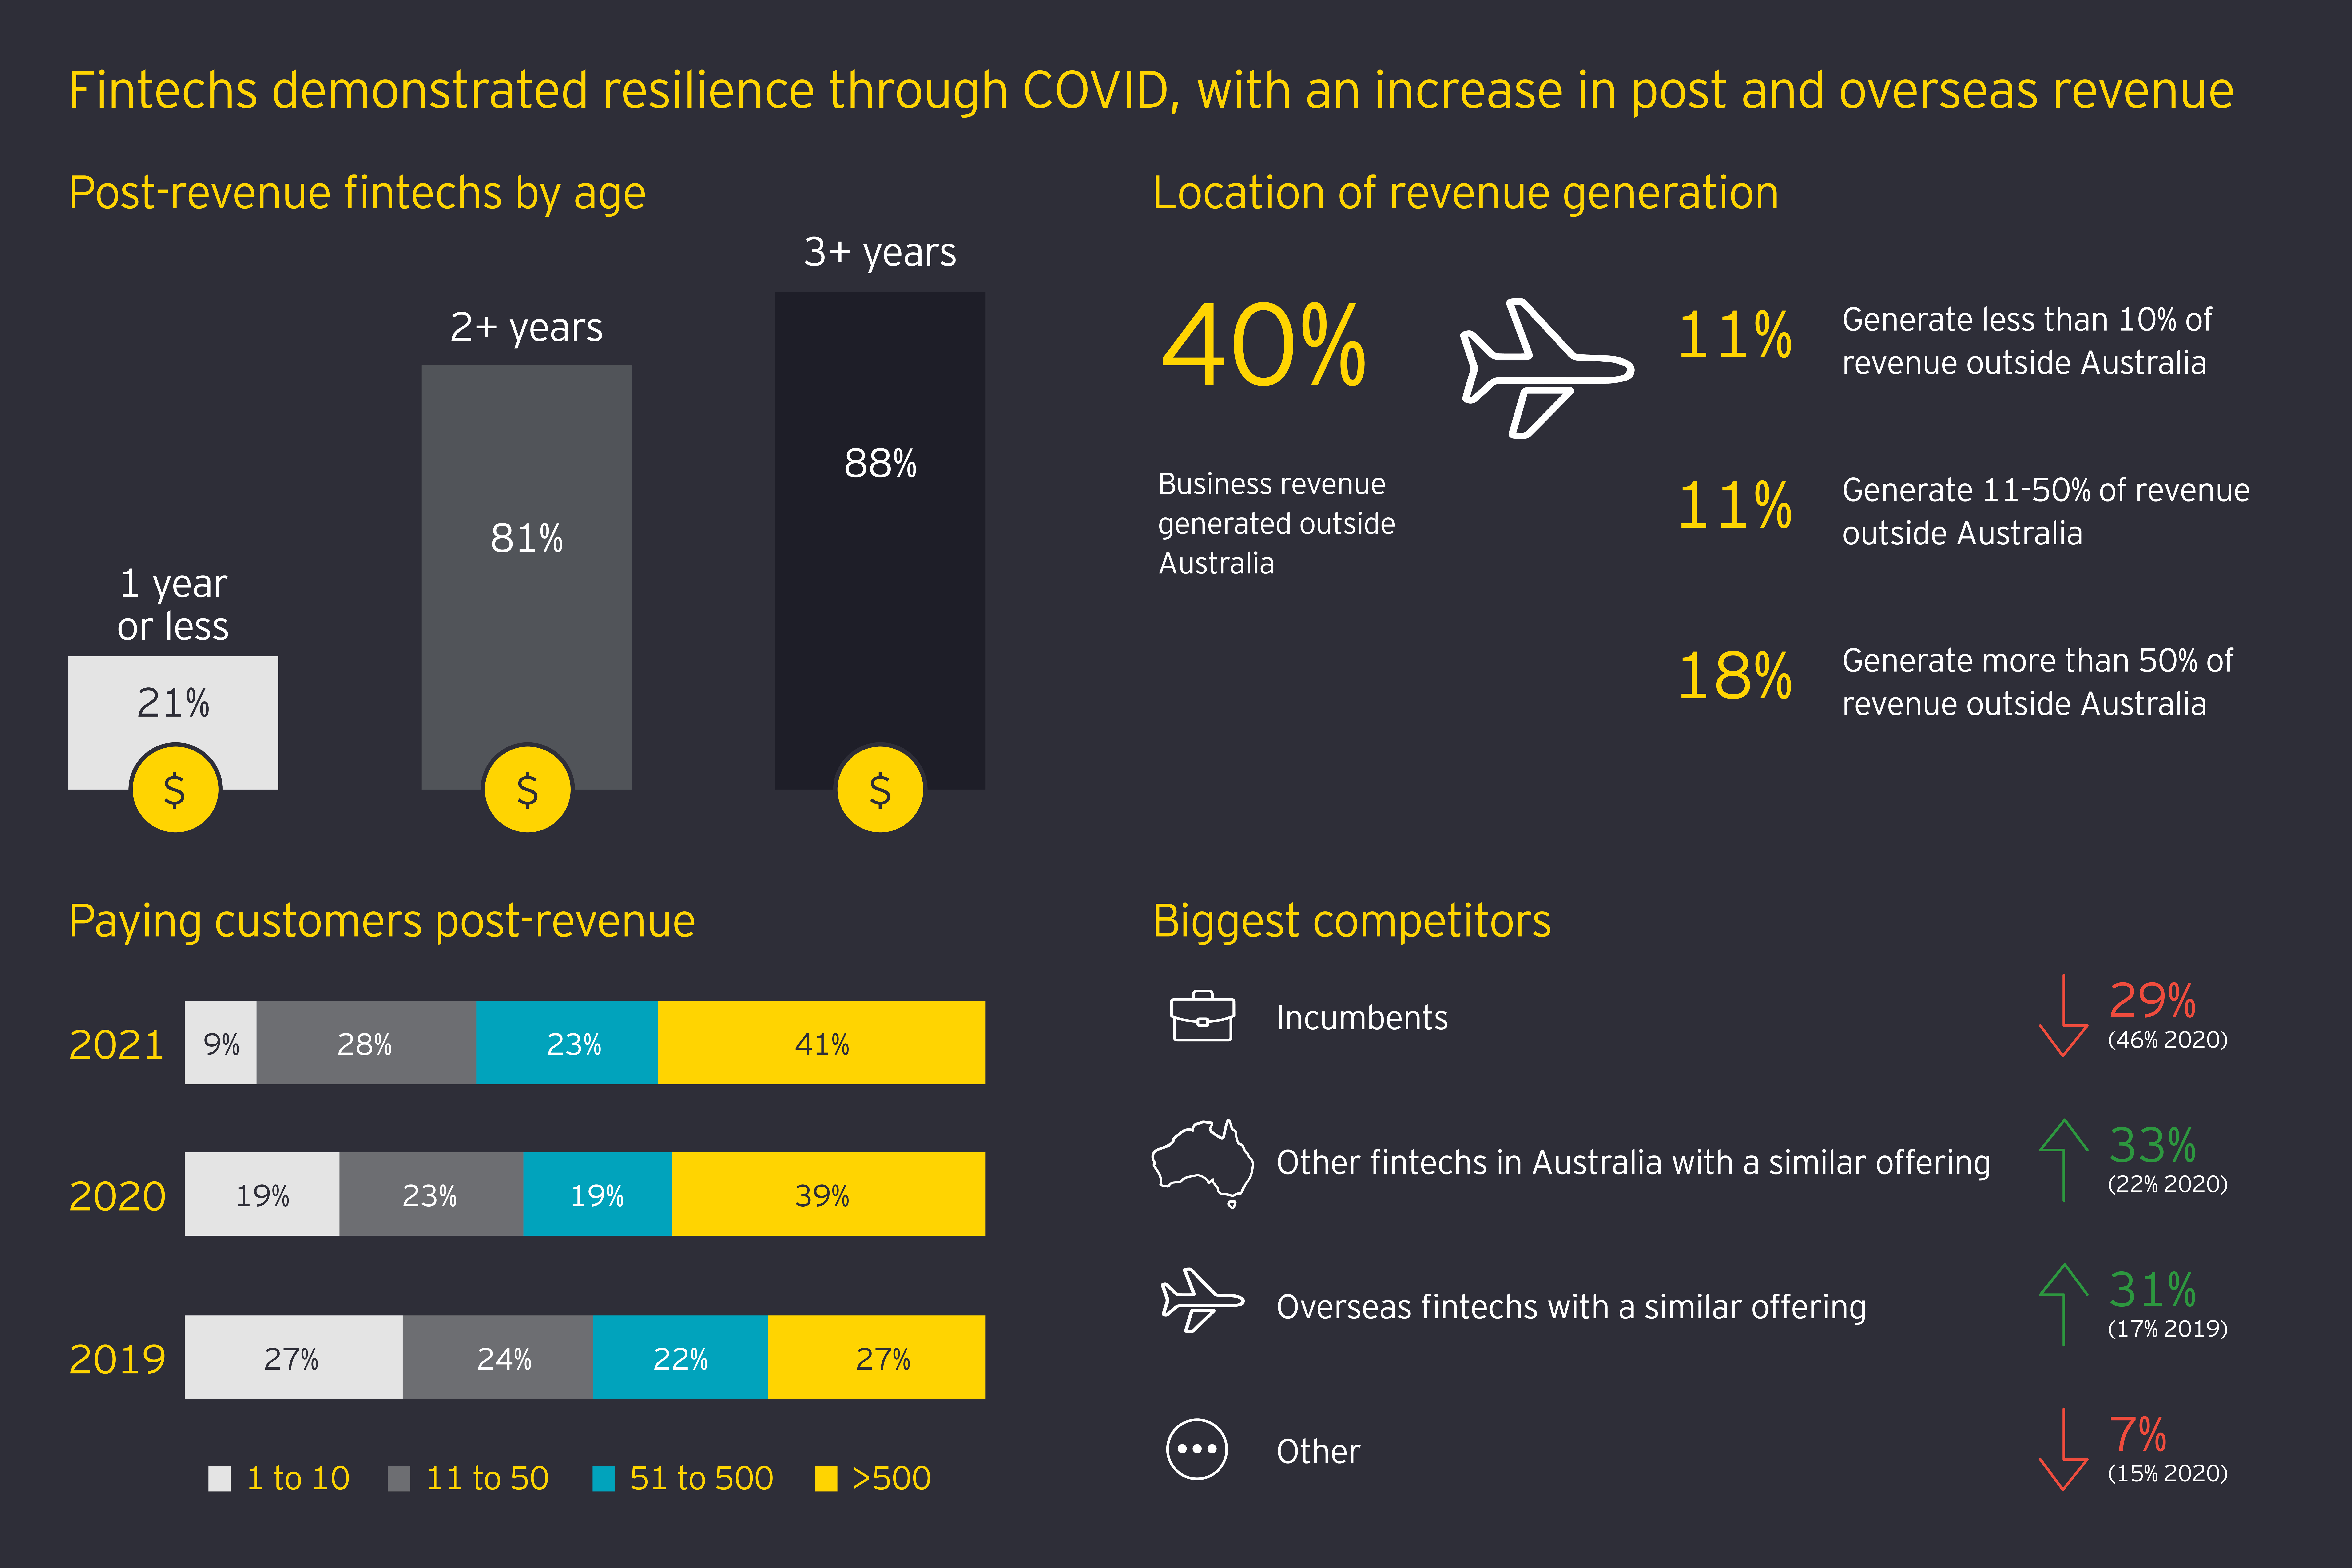 ey-au-fintech-Infographic-resilience-2021